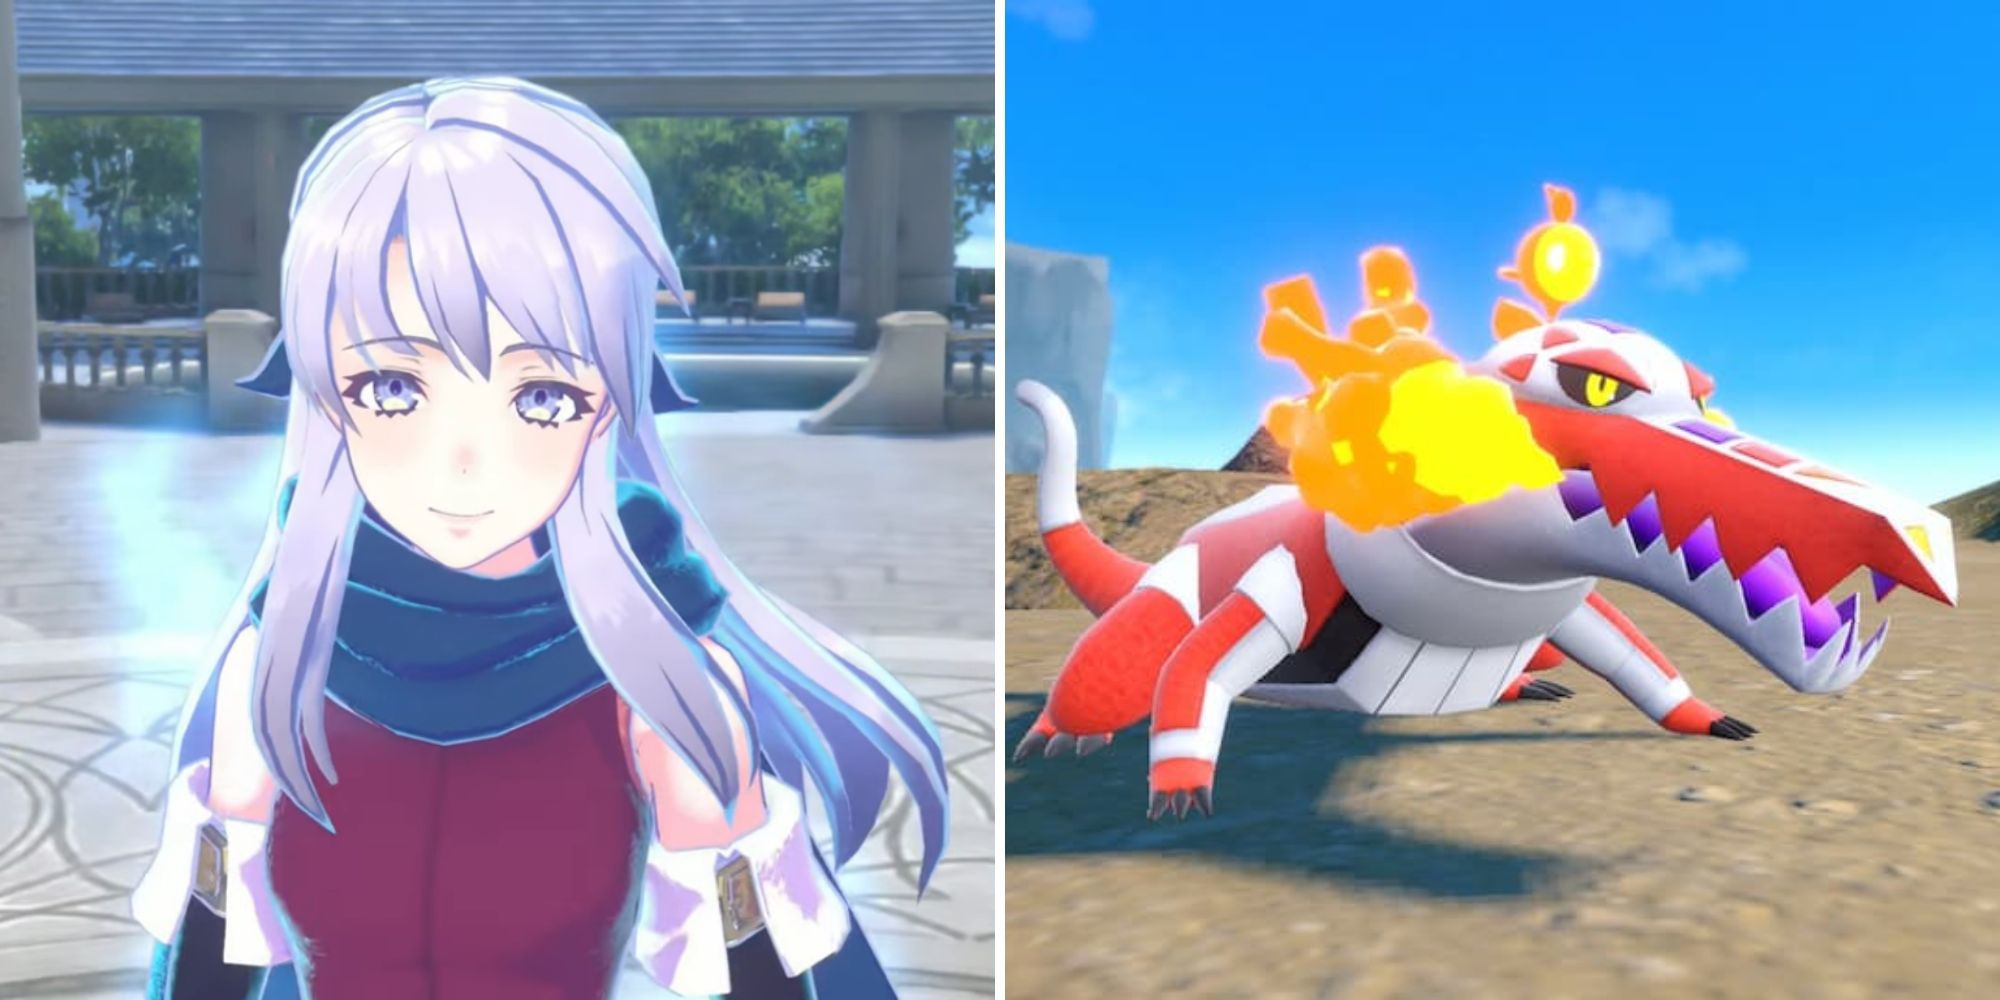 Micaiah stands in the Somnium and Skeledirge stands on a mountain during a sunny day